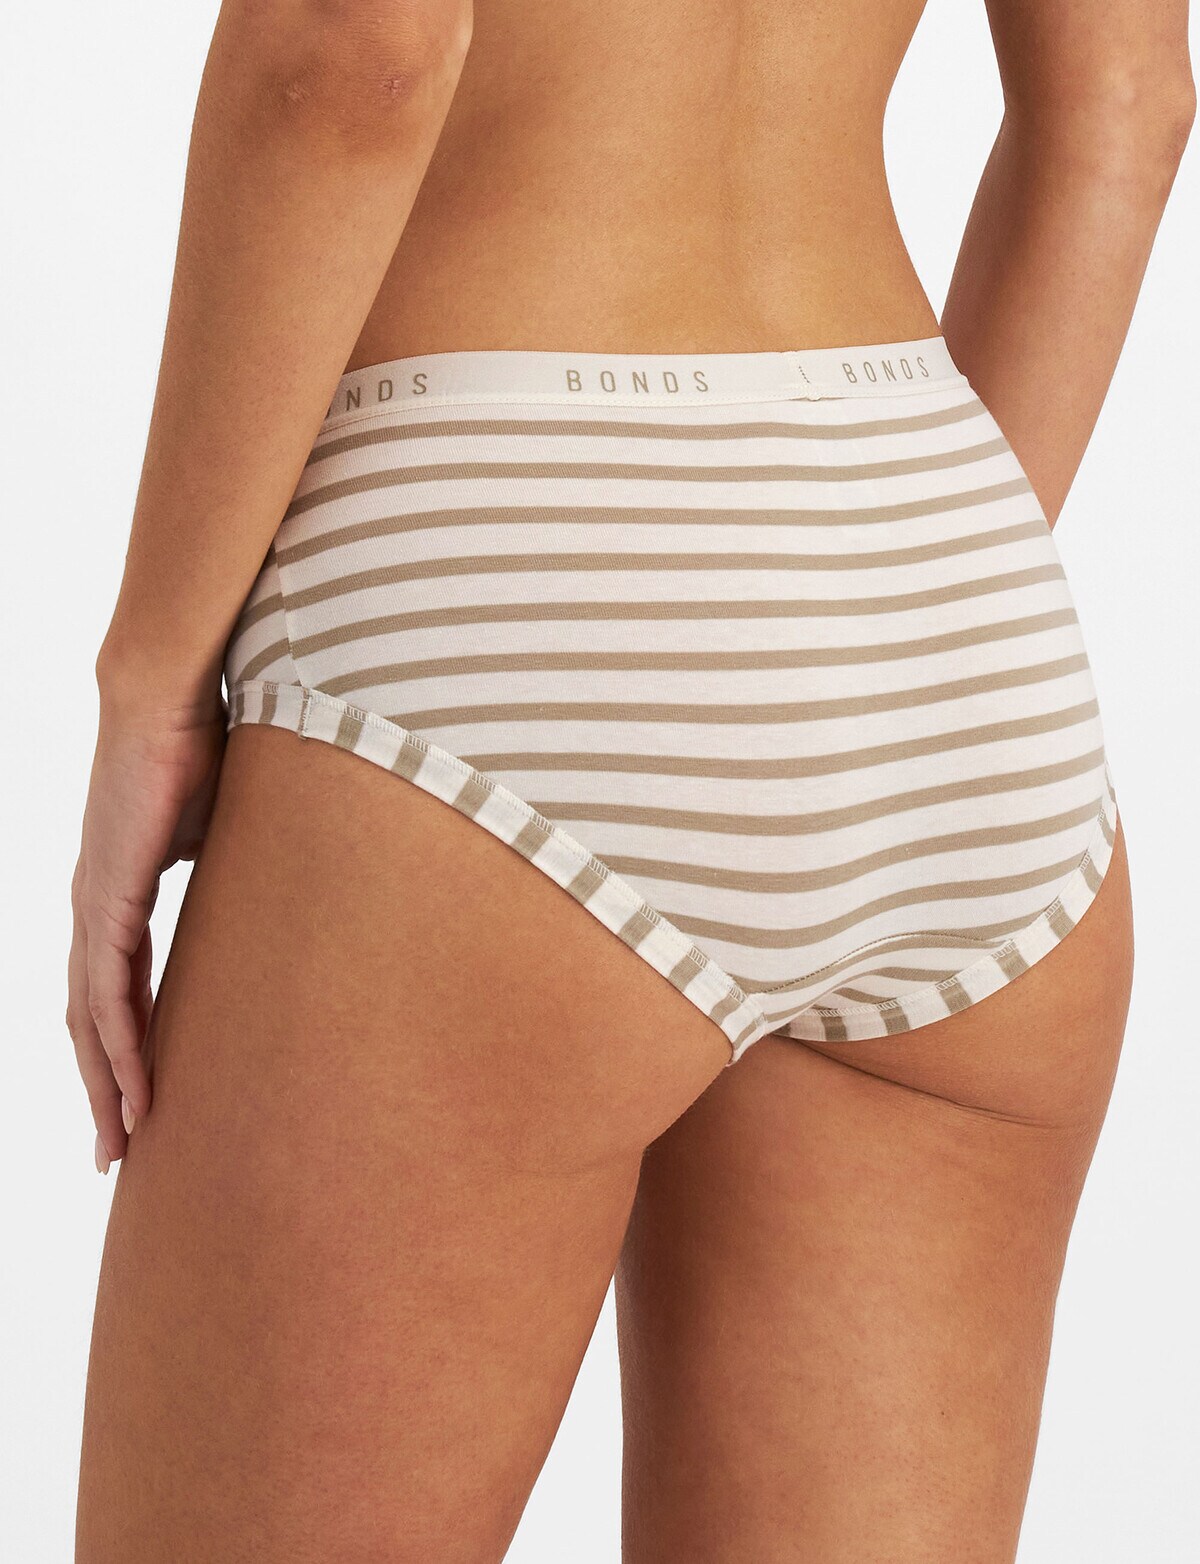 Bonds Cottontails Midi Brief, 3-Pack, Red, Pink, & Striped